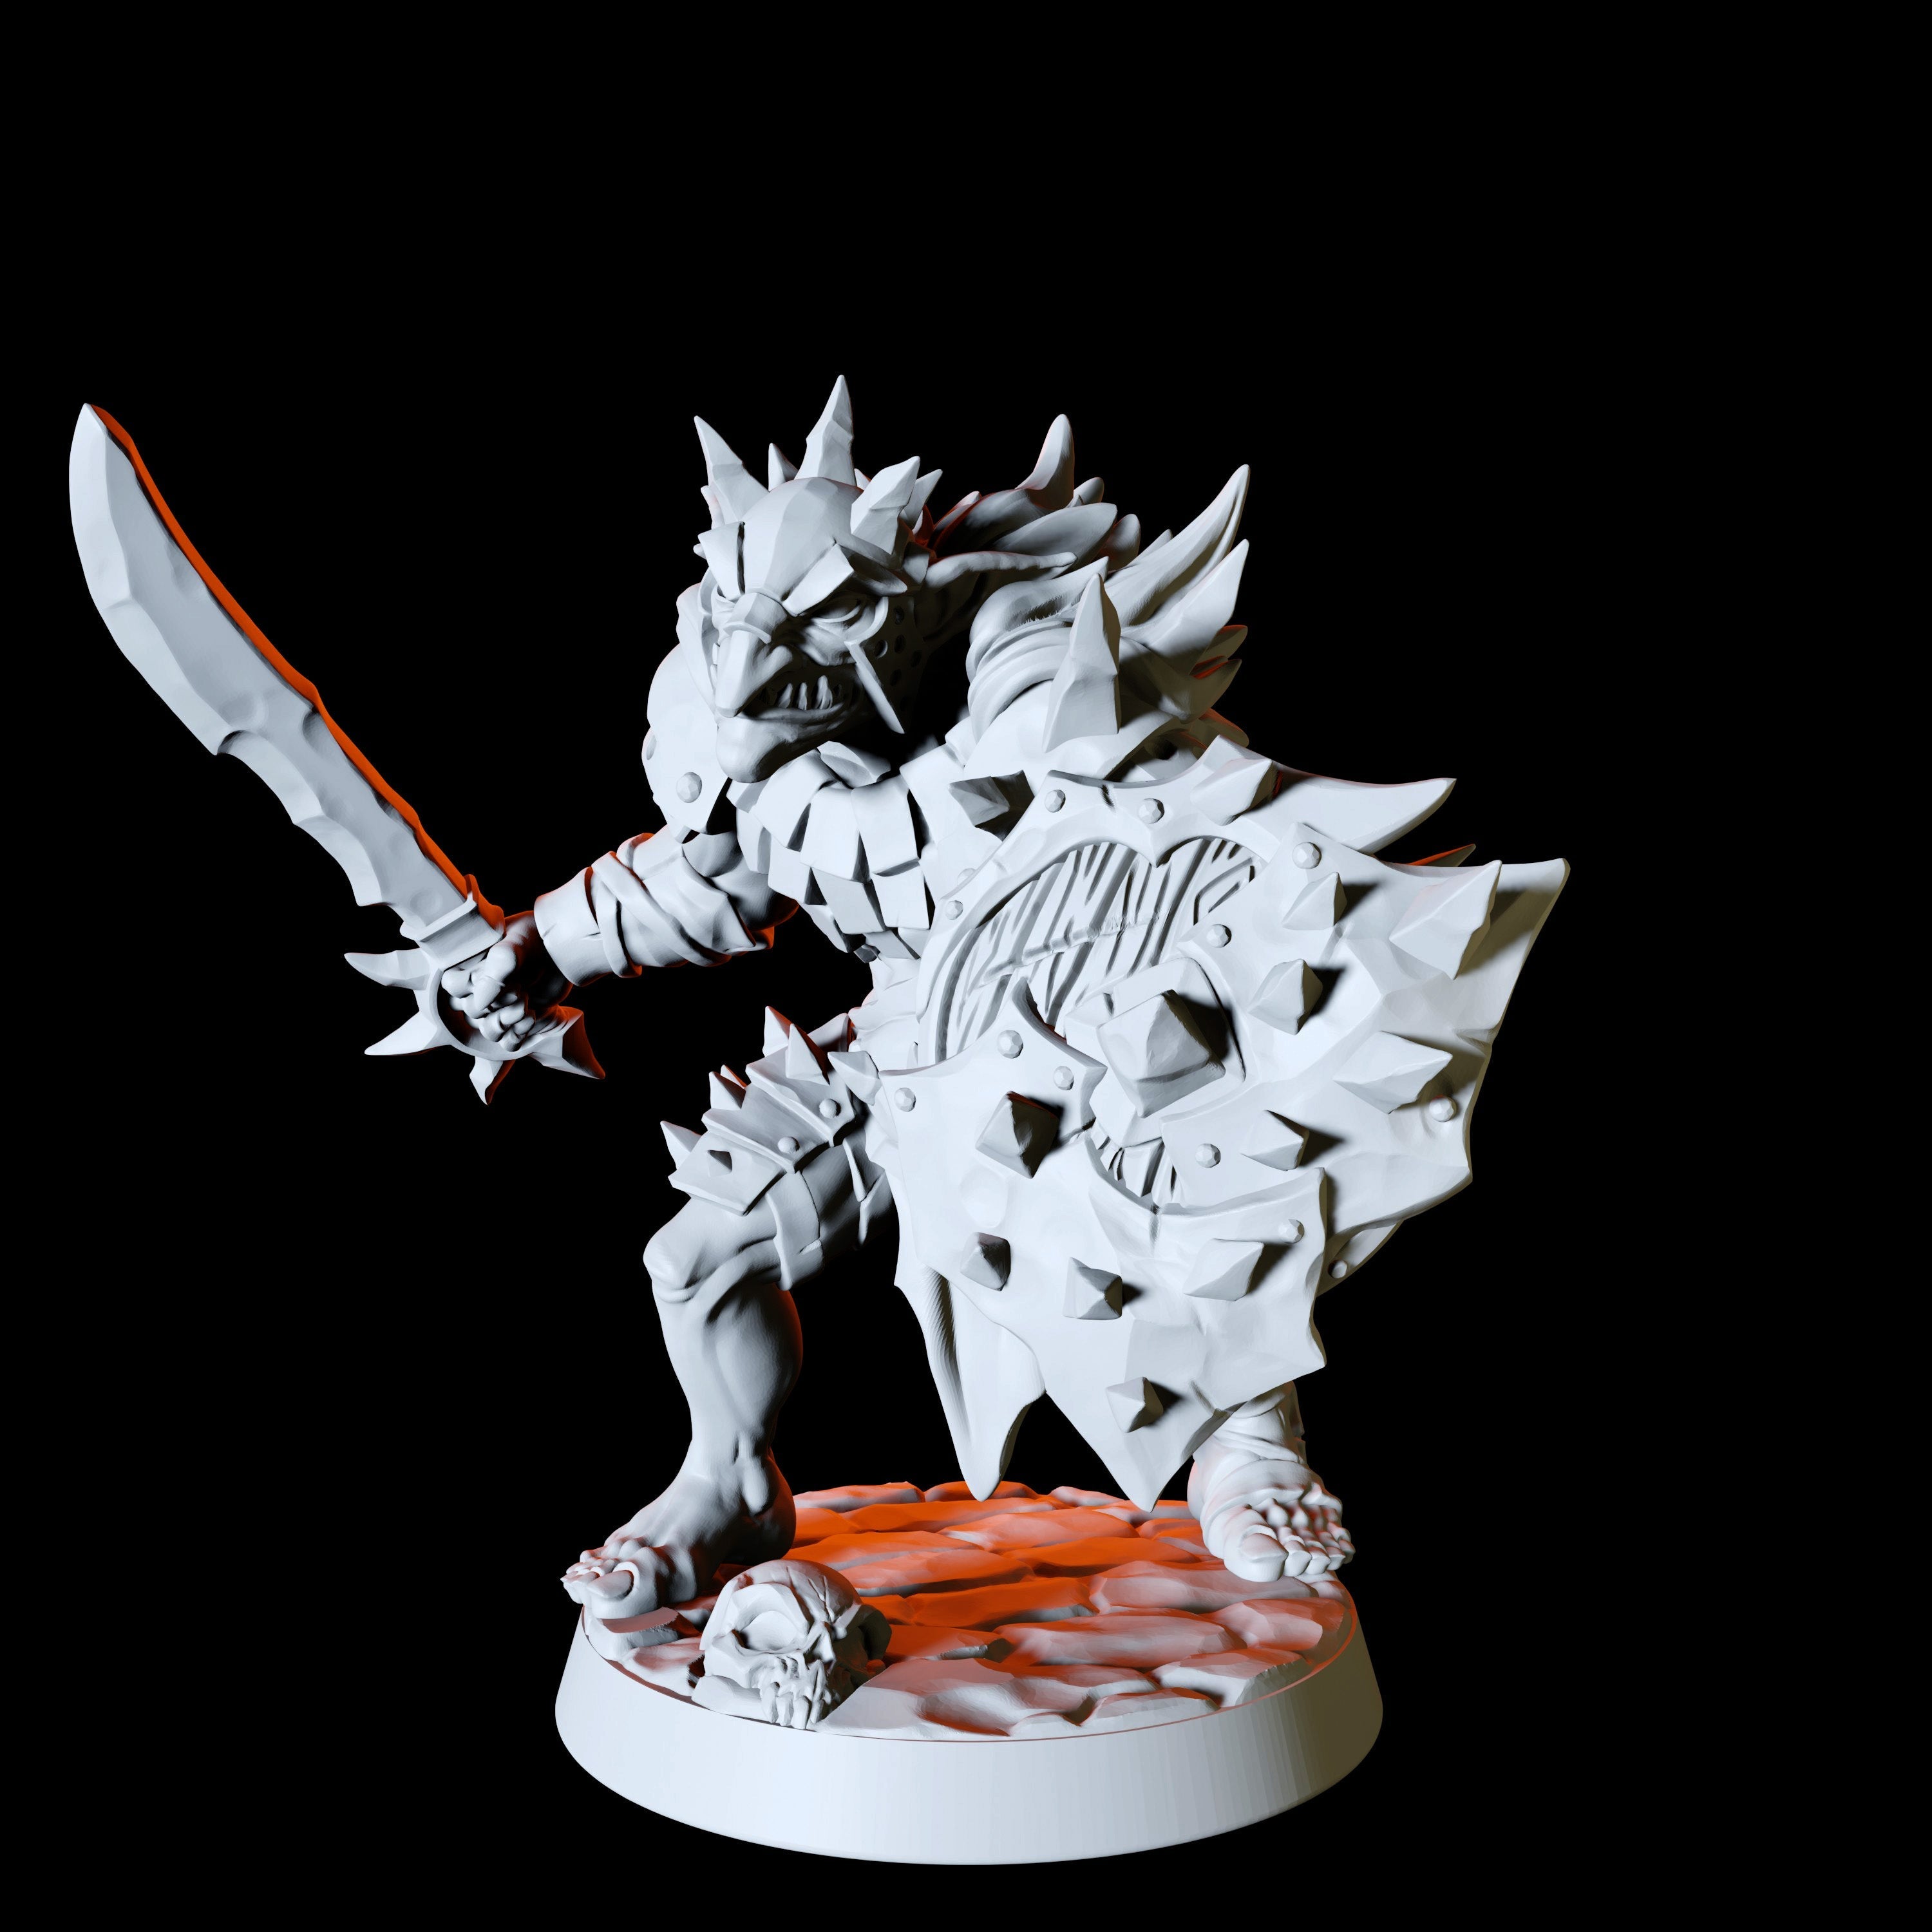 Sword and Shield Hobgoblin Miniature for Dungeons and Dragons - Myth Forged